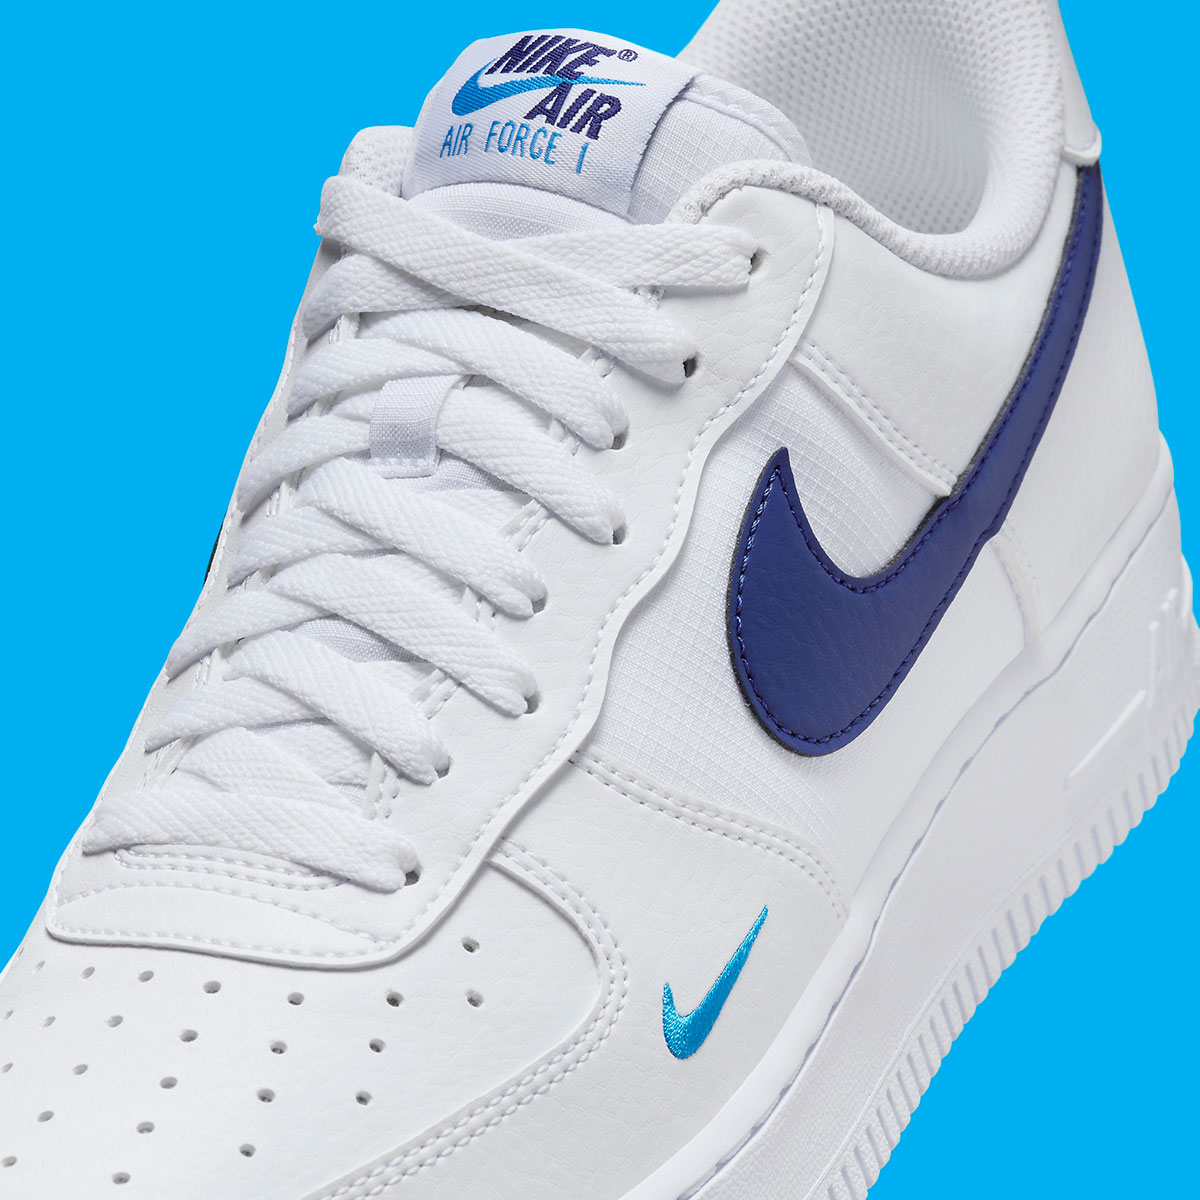 nike air force 1 low white obsidian photo blue HF3836 100 1